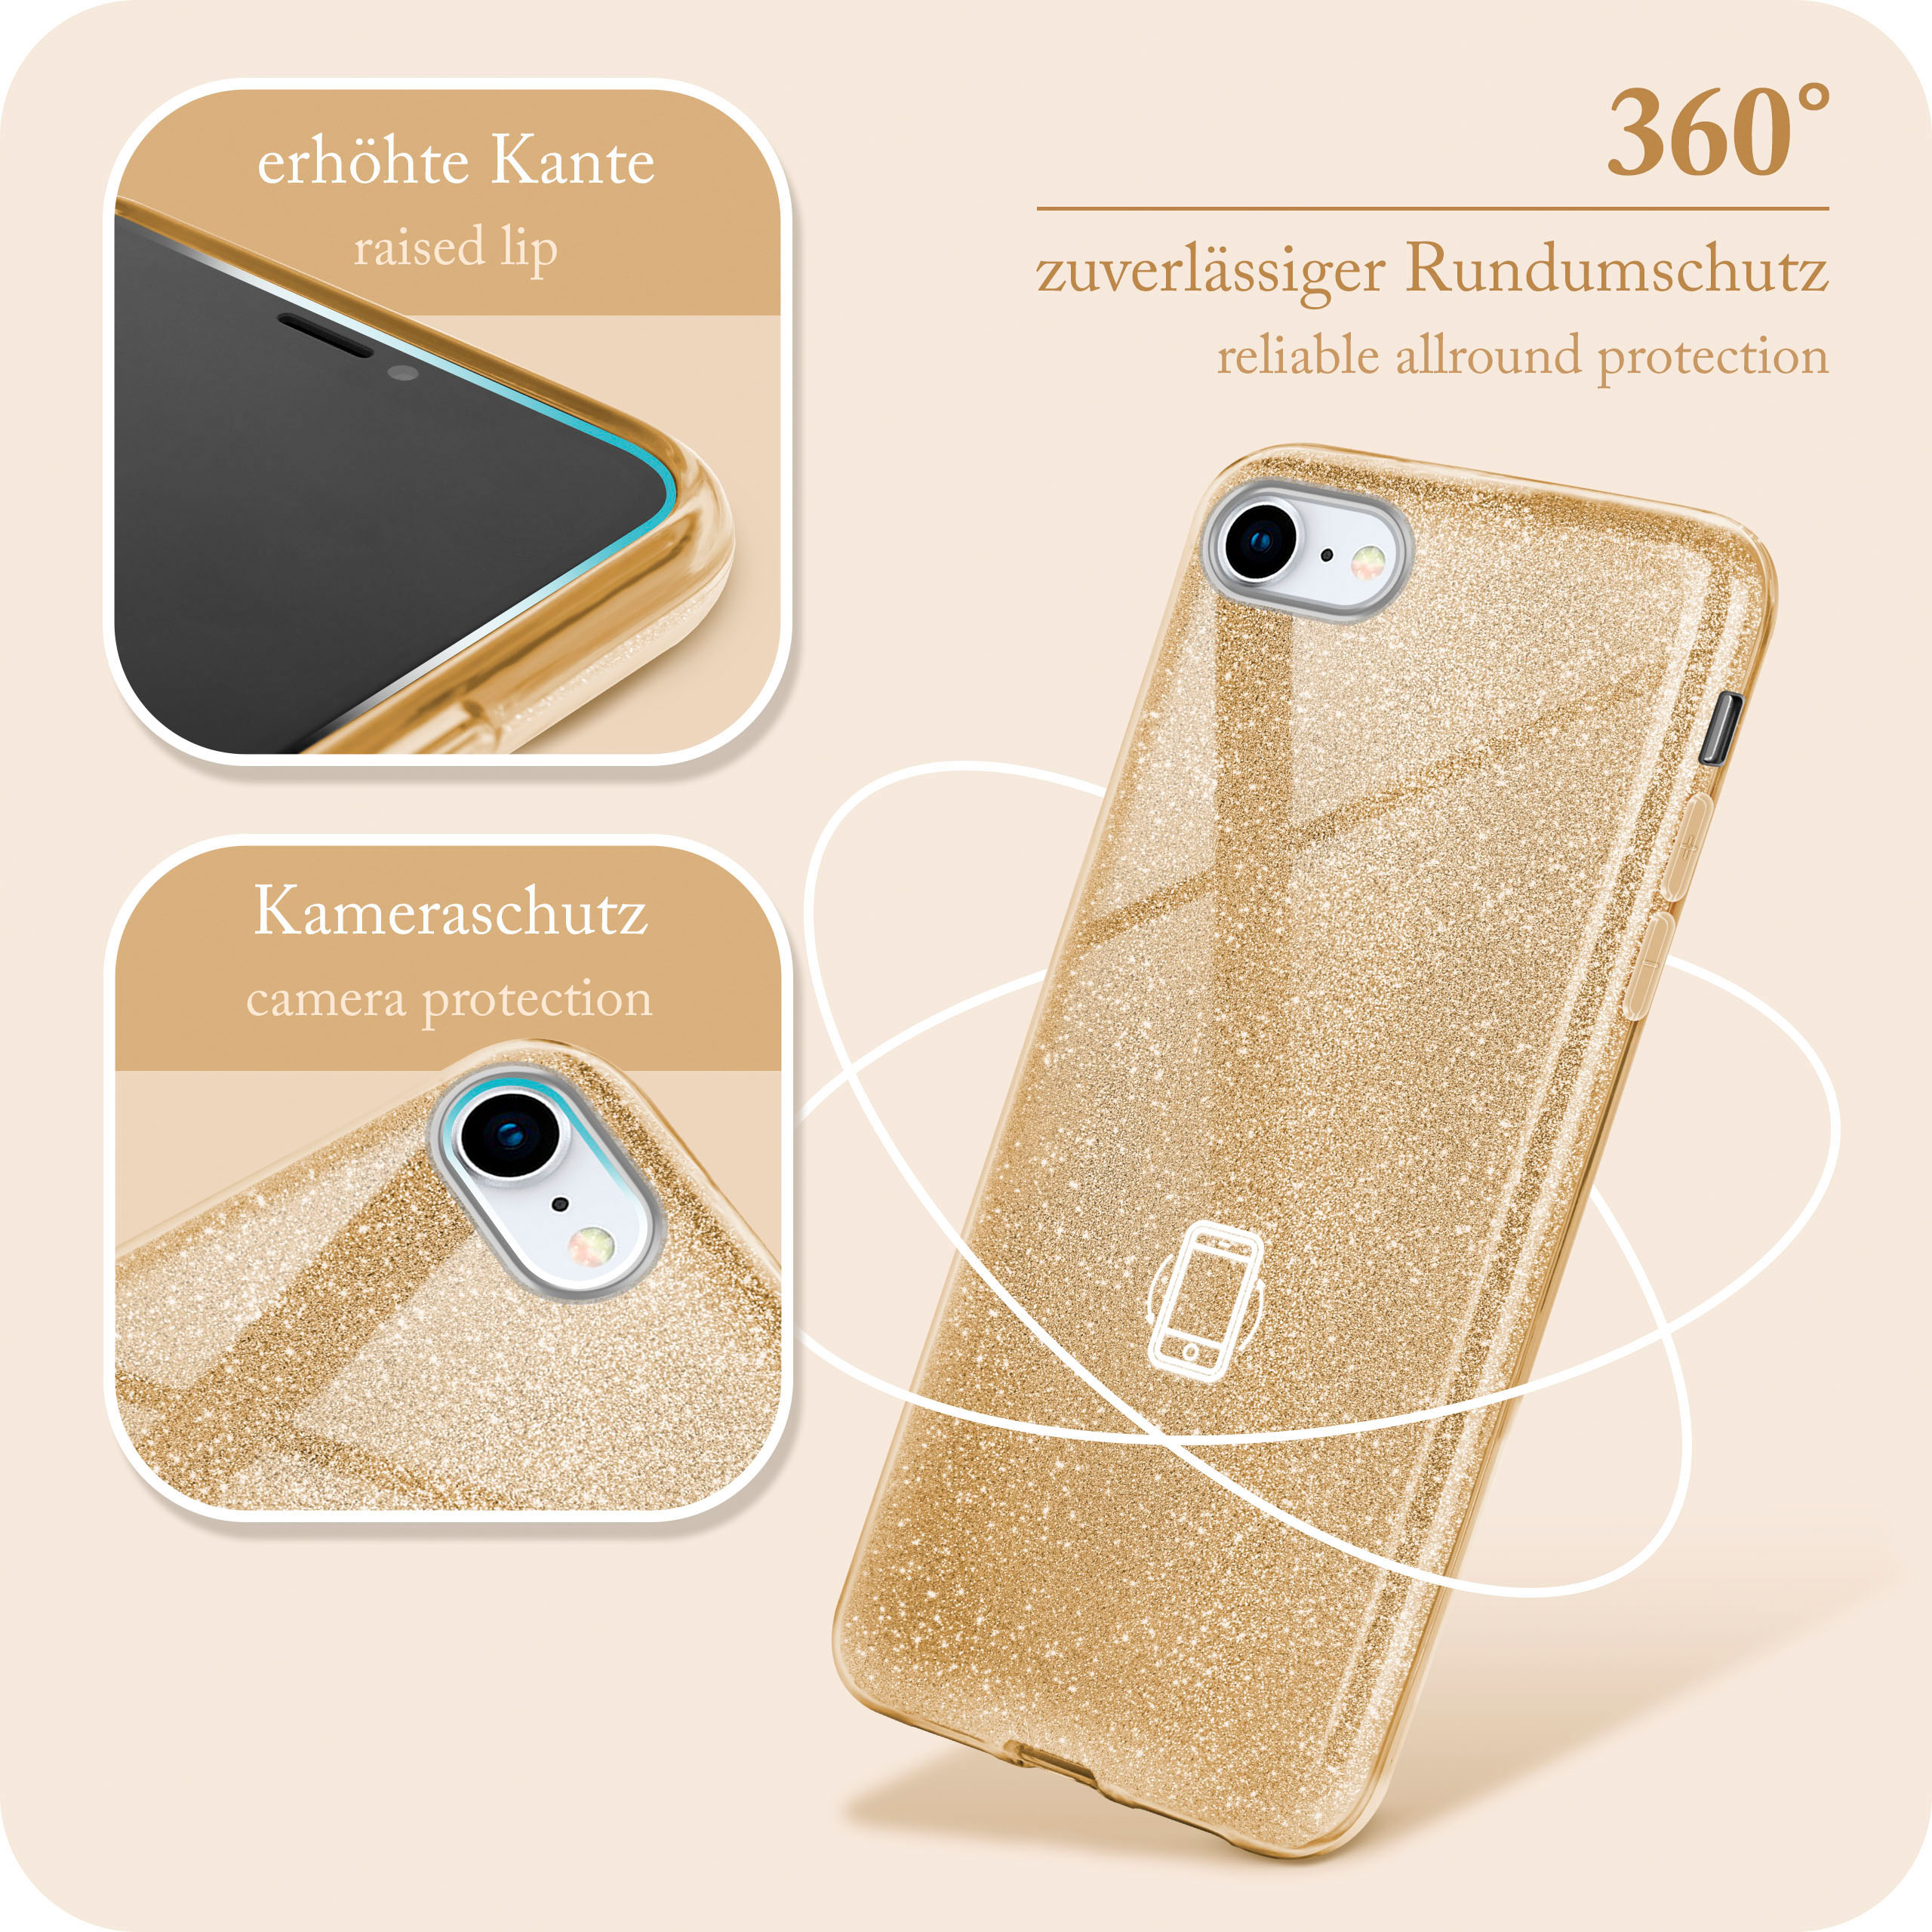 ONEFLOW Glitter Case, 8, Gold Apple, Backcover, / iPhone Shine 7 iPhone 